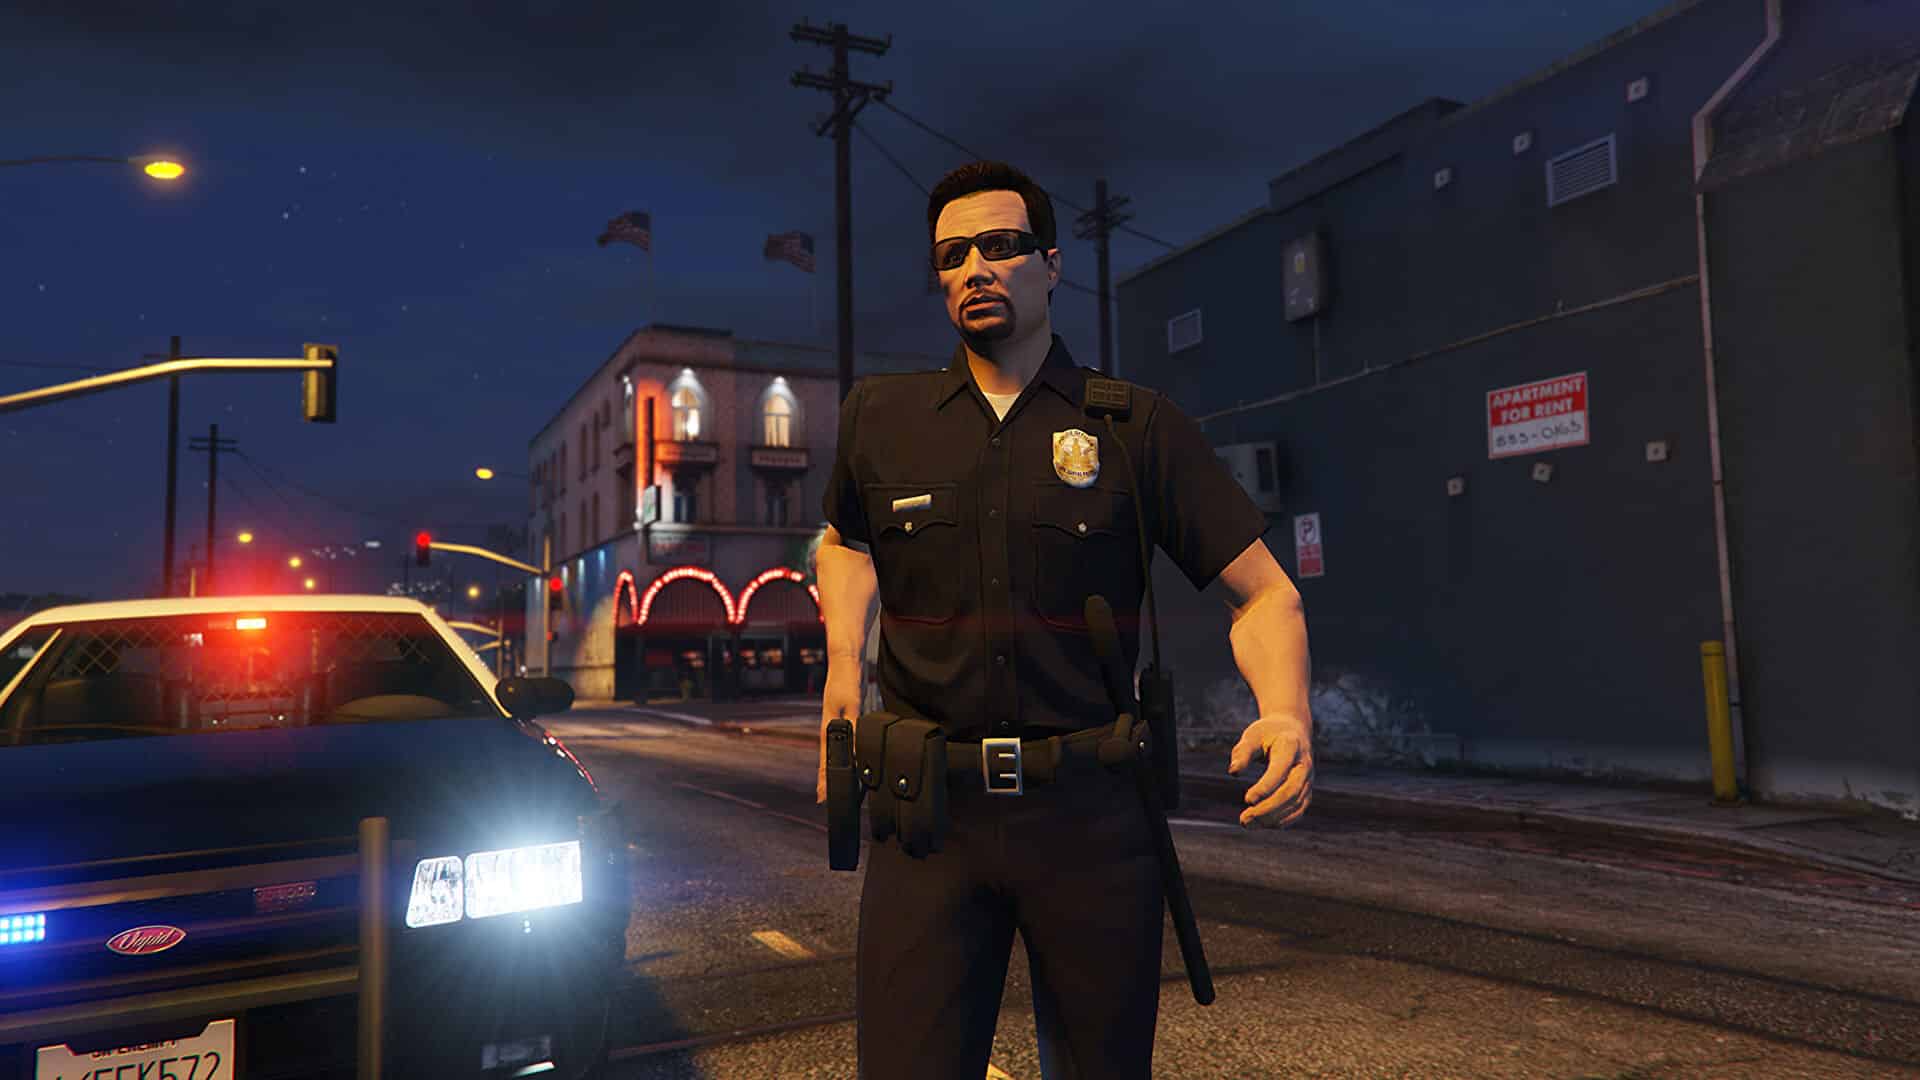 GTA V and RDR2 VR modder receives DMCA takedown from Take-Two Interactive